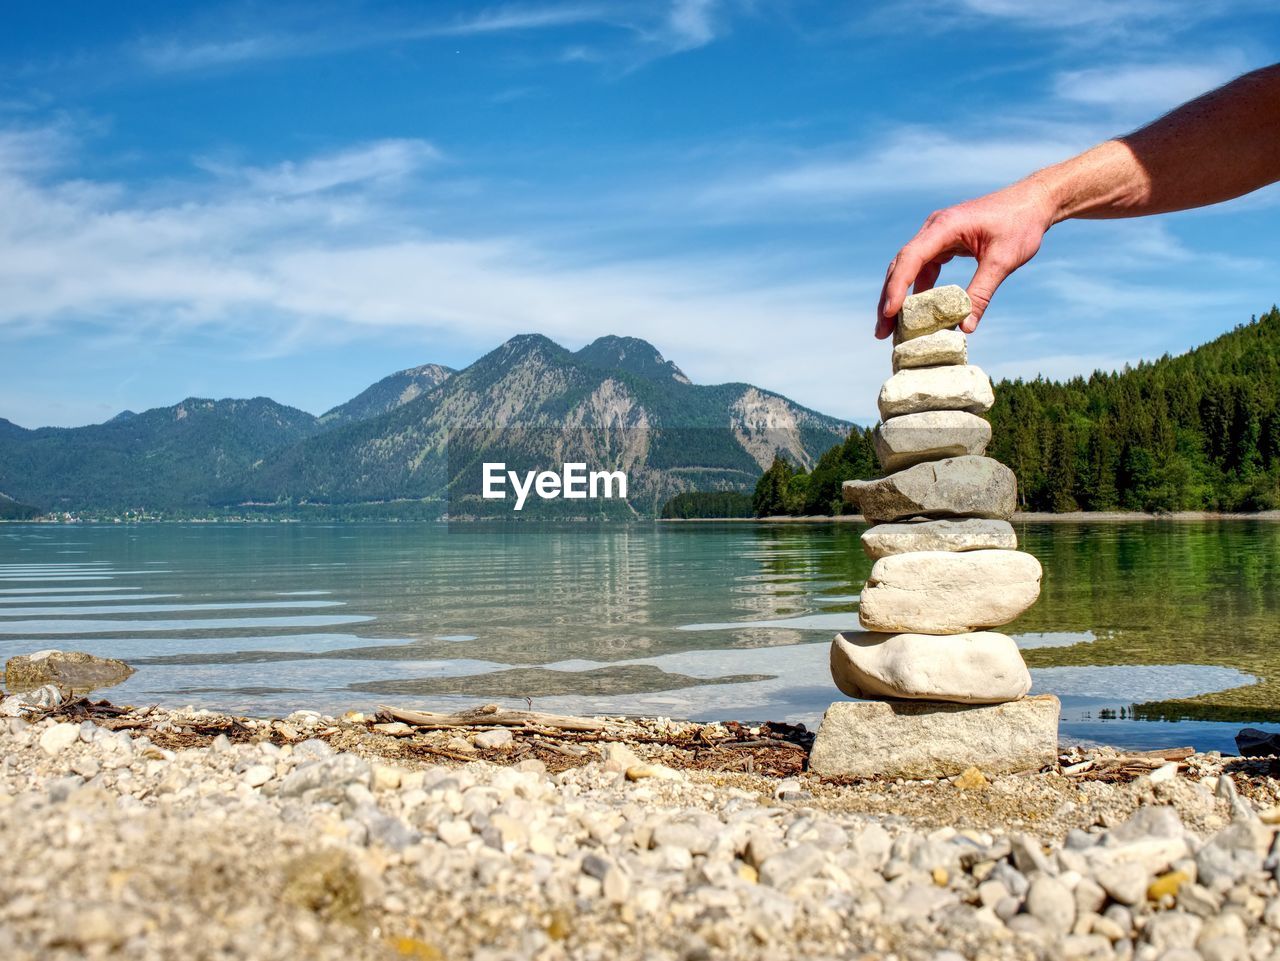 HUMAN HAND ON ROCK AGAINST LAKE